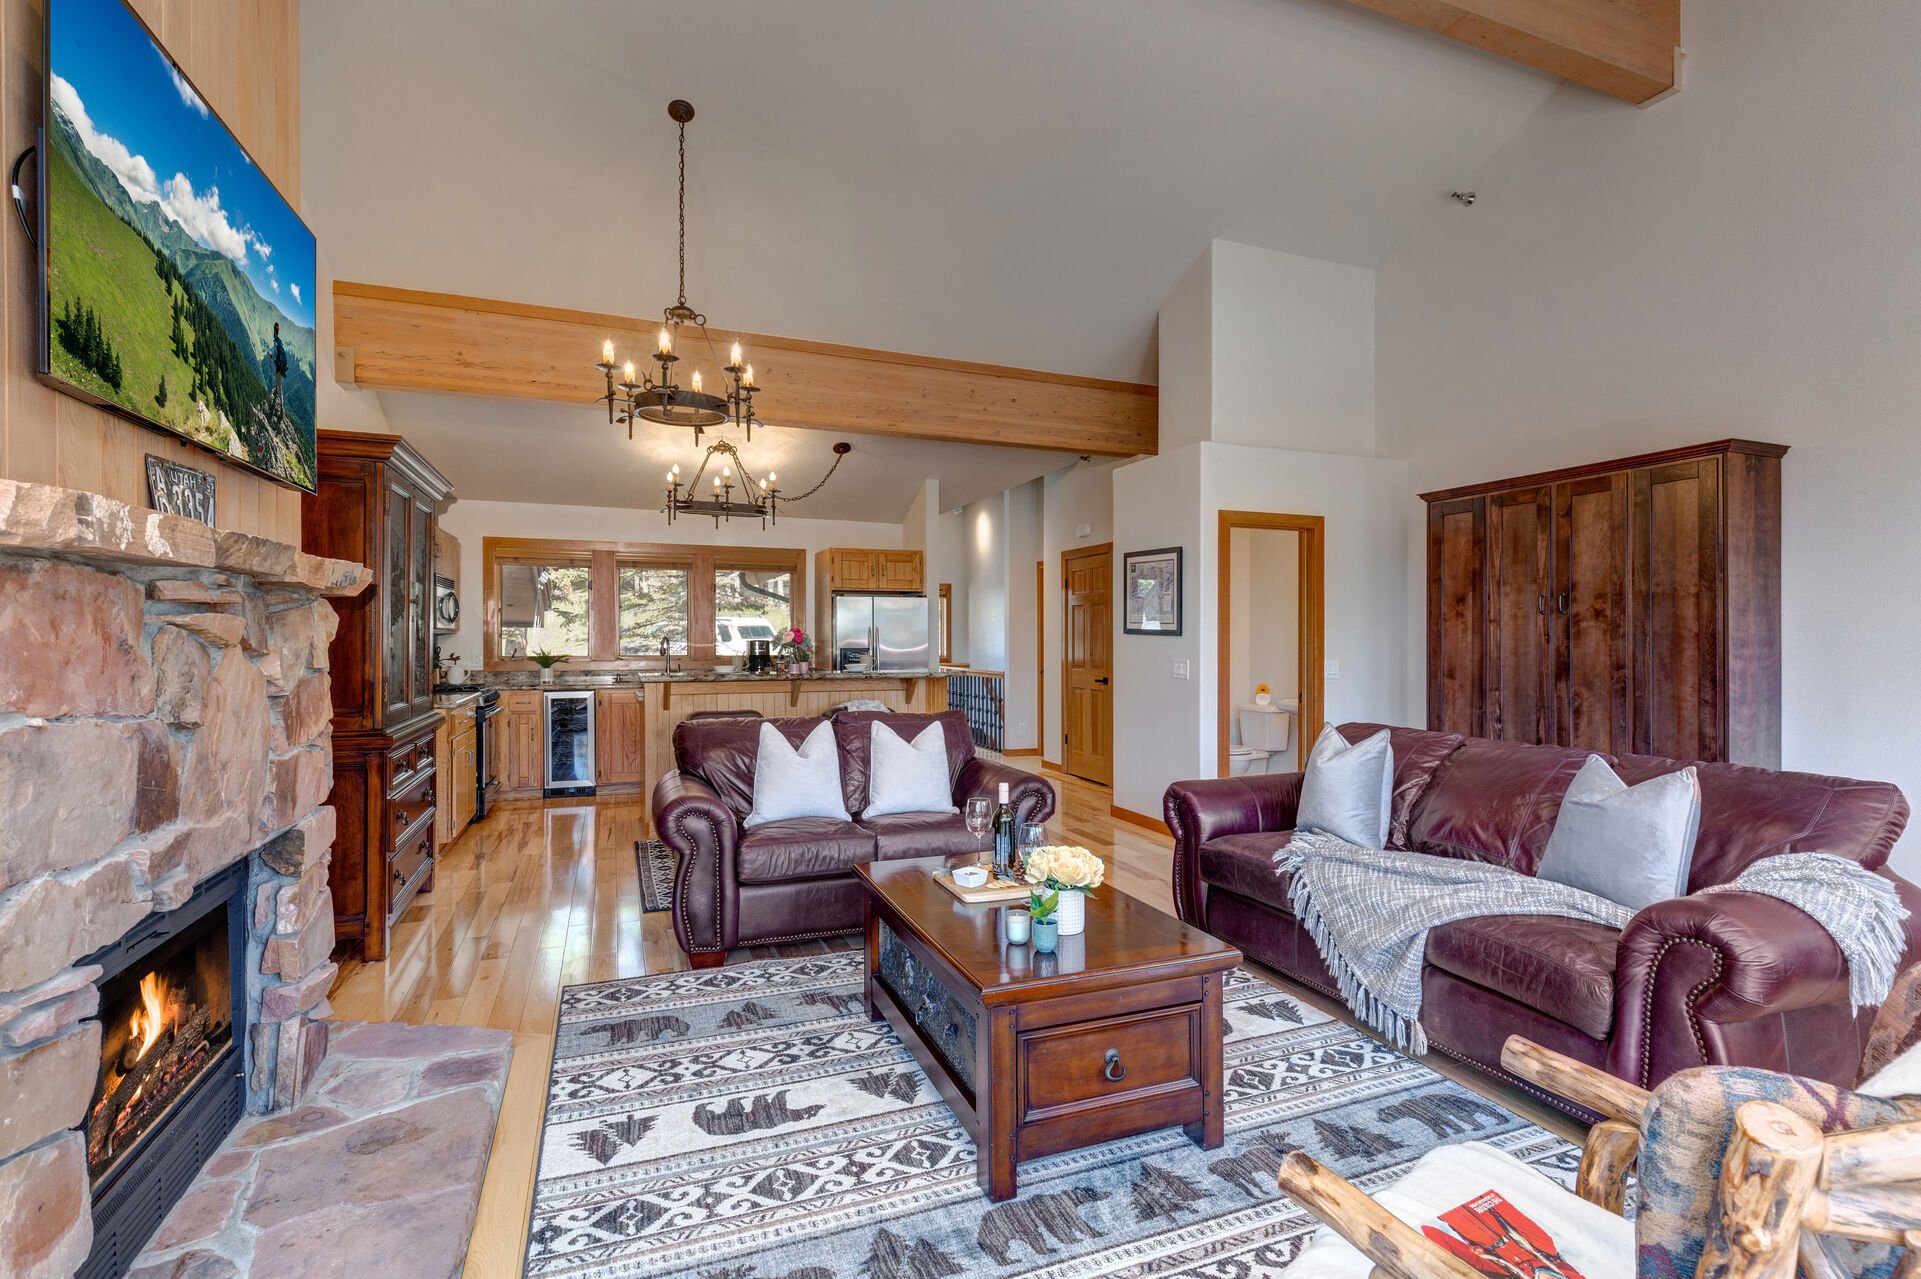 Living Room with plush leather furnishings, gas-assist fireplace, queen-sized Murphy Bed, vaulted ceilings, LG smart tv, and private deck access